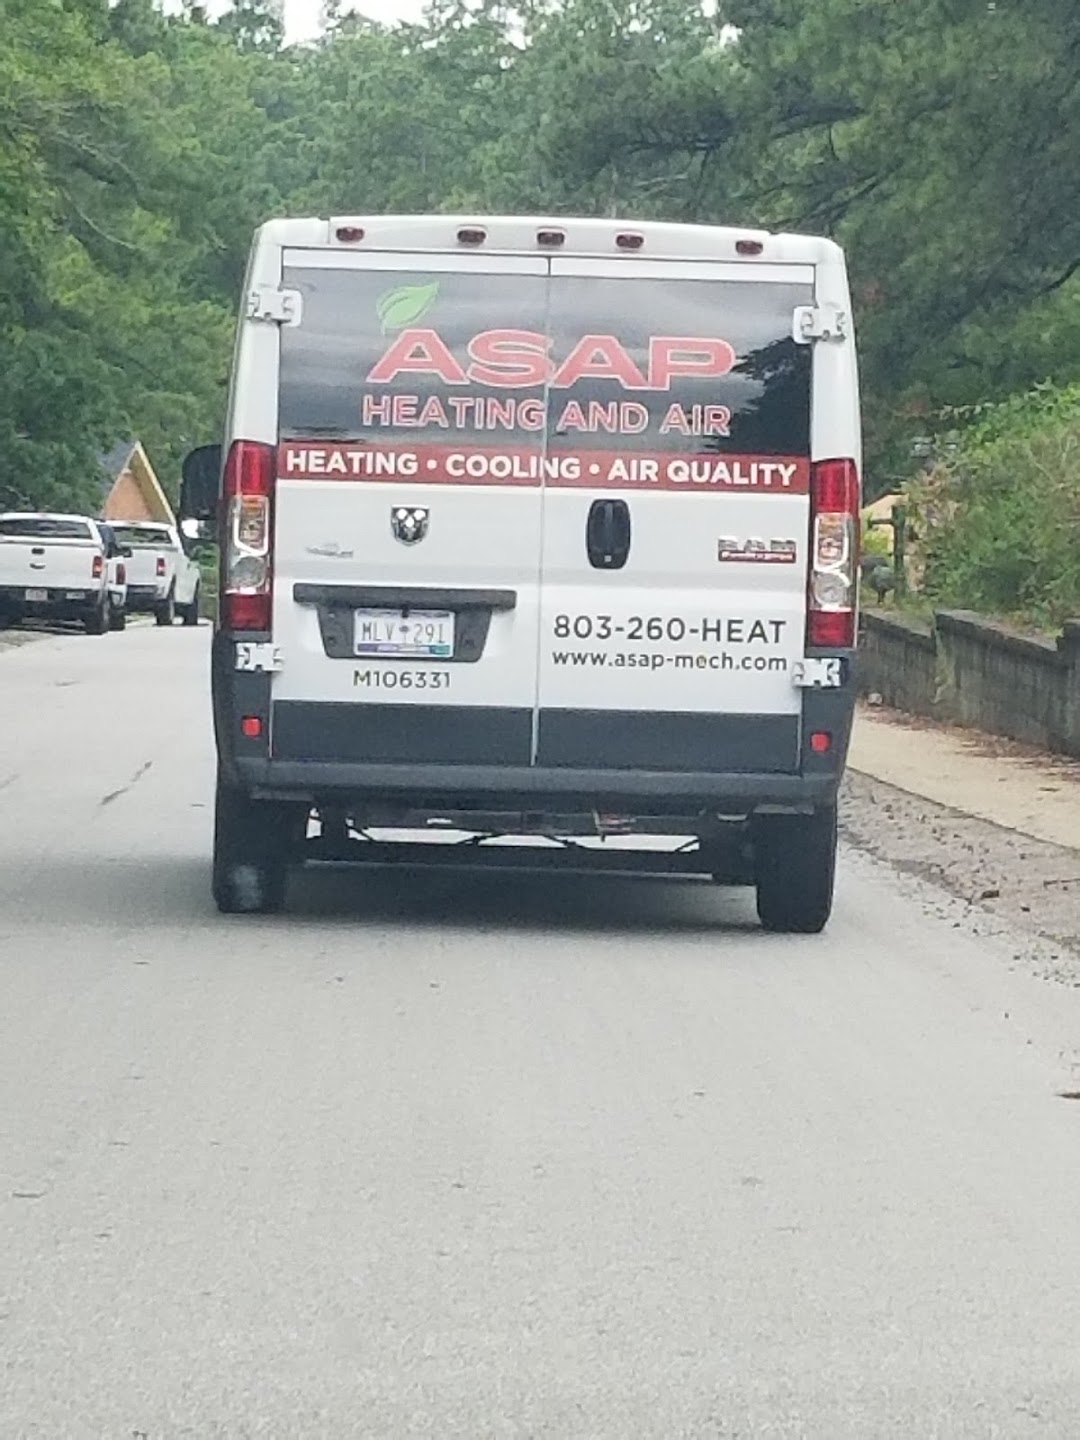 ASAP Heating and Air